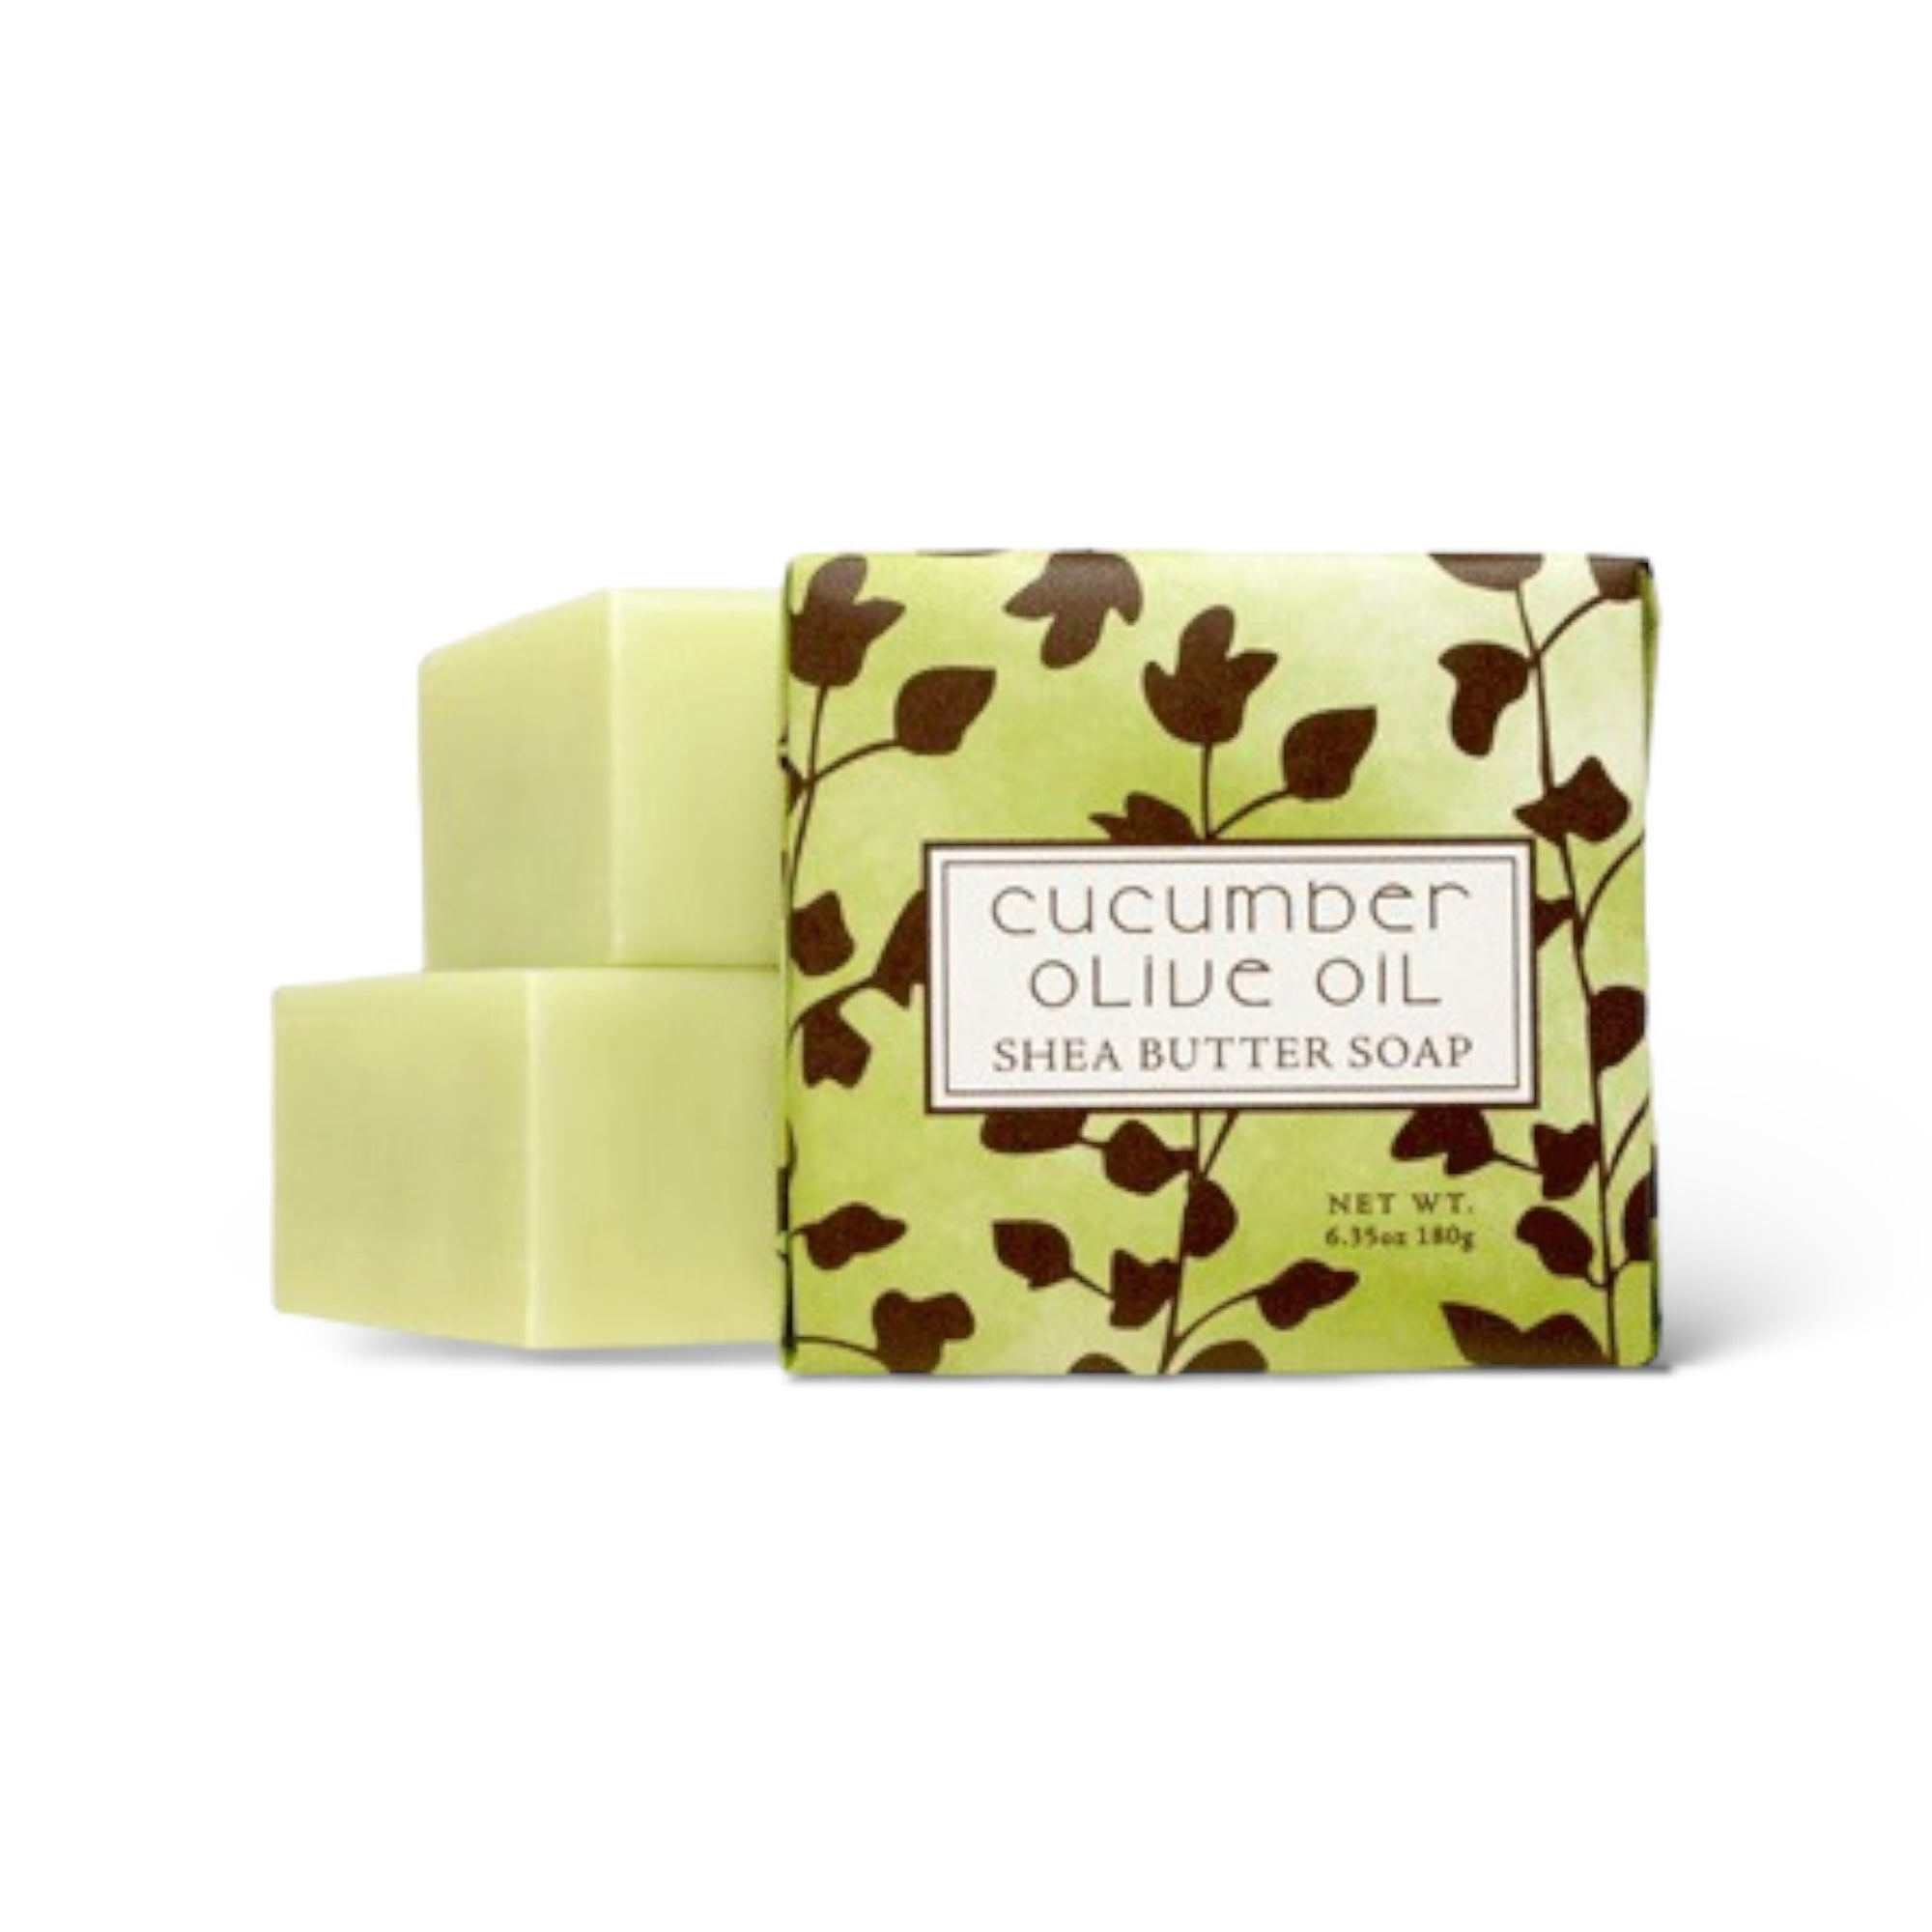 Cucumber Olive Oil Shea Butter Soap by Greenwich Bay Trading Co.